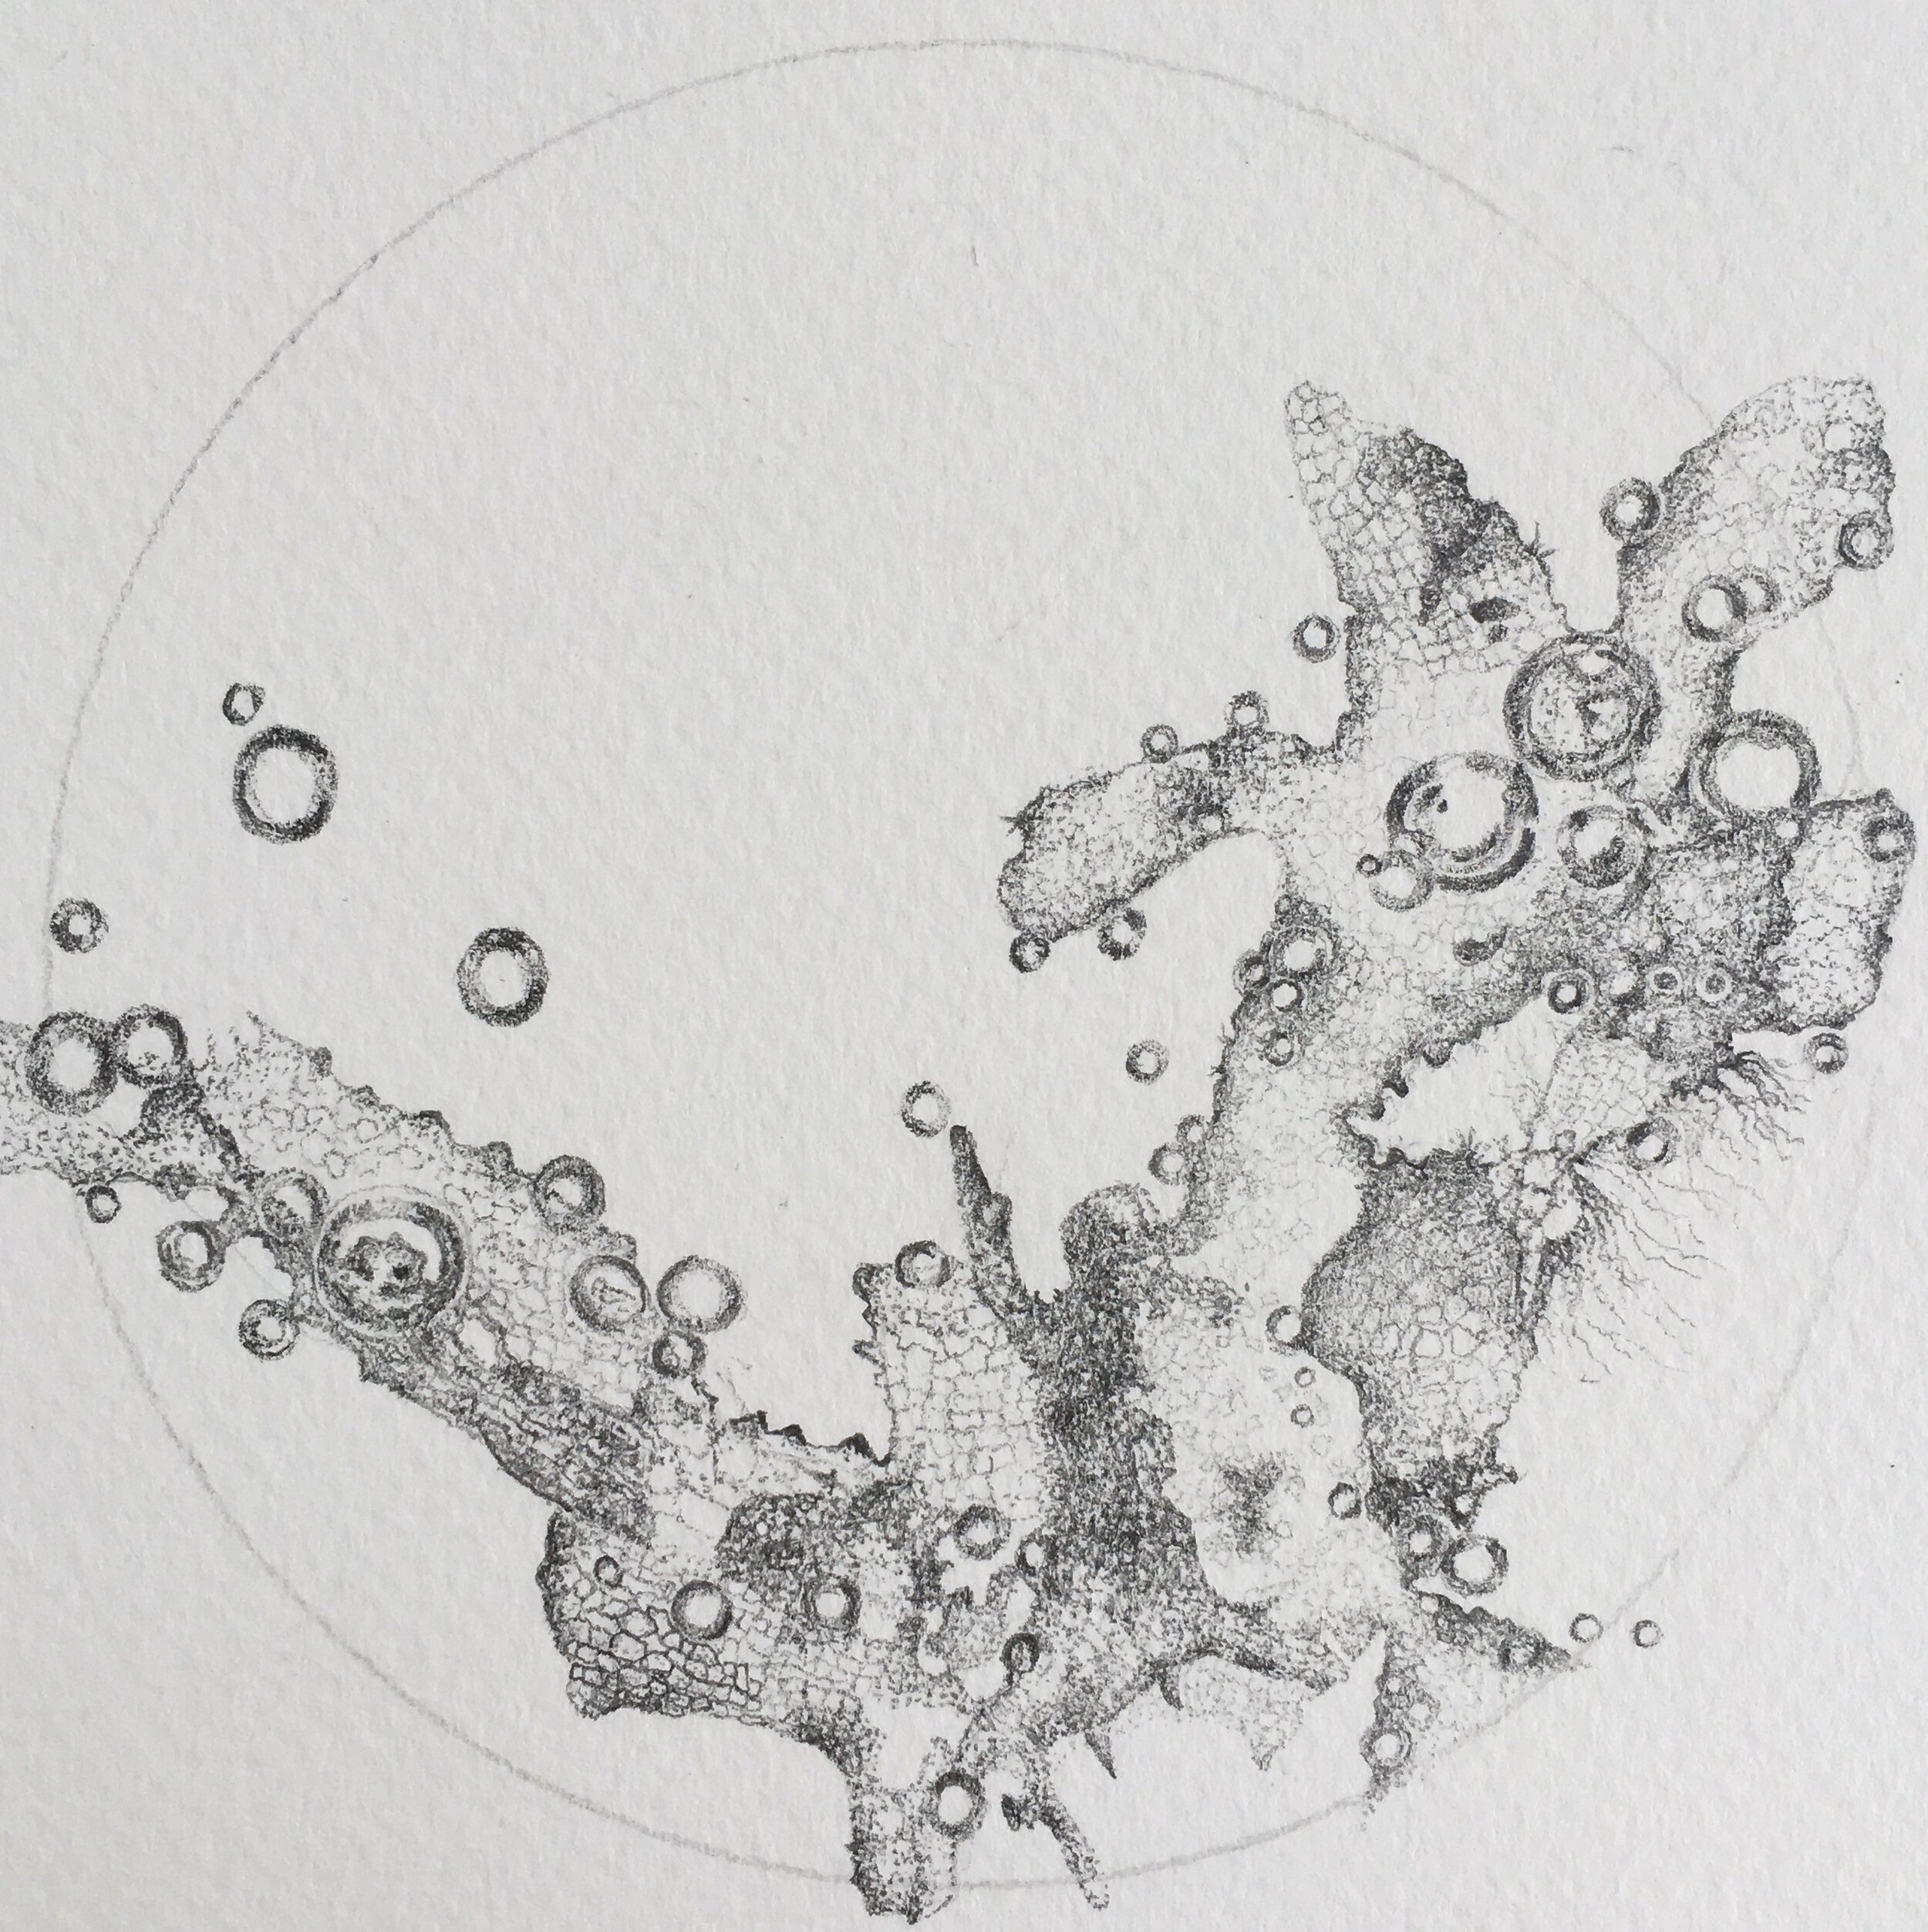  Early sketches, plankton; artist Julie Nash 